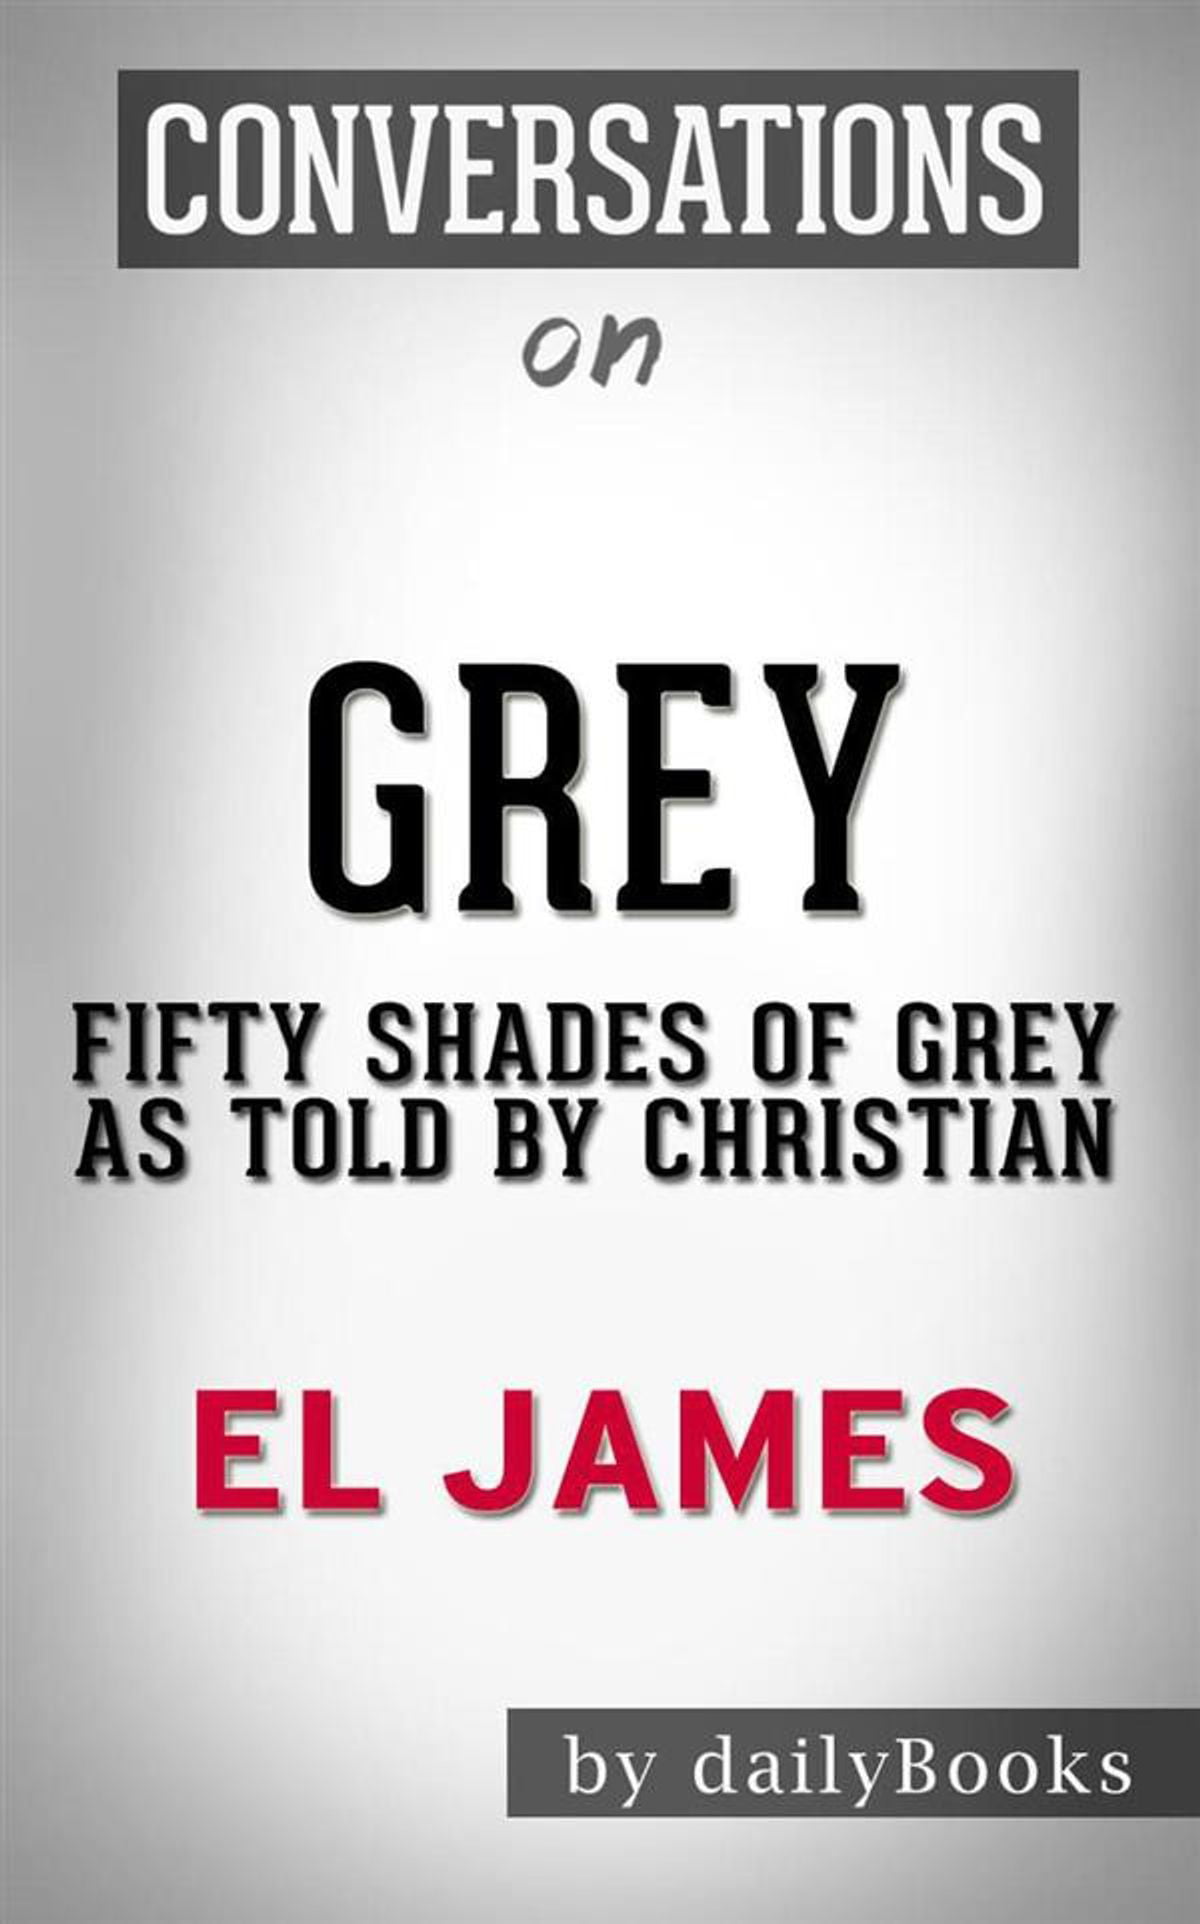 50 shades of grey ebook free download for mobile